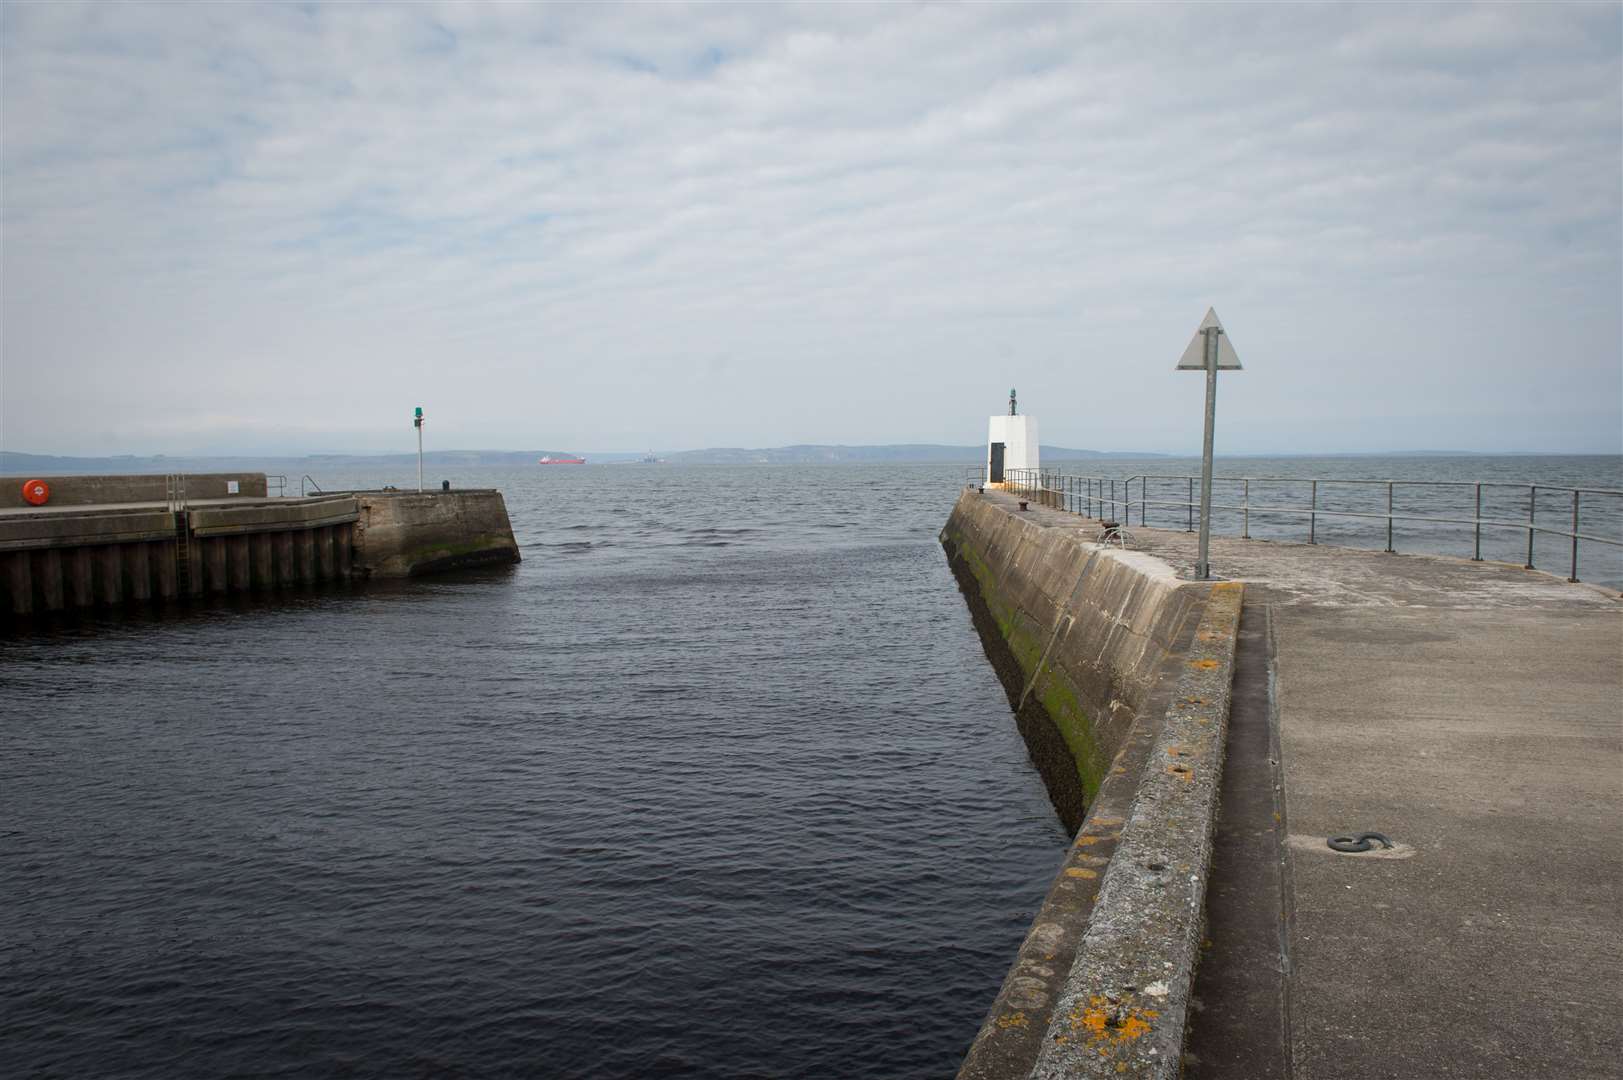 Two paddleboarders were taken to Nairn harbour after getting into difficulty at sea.